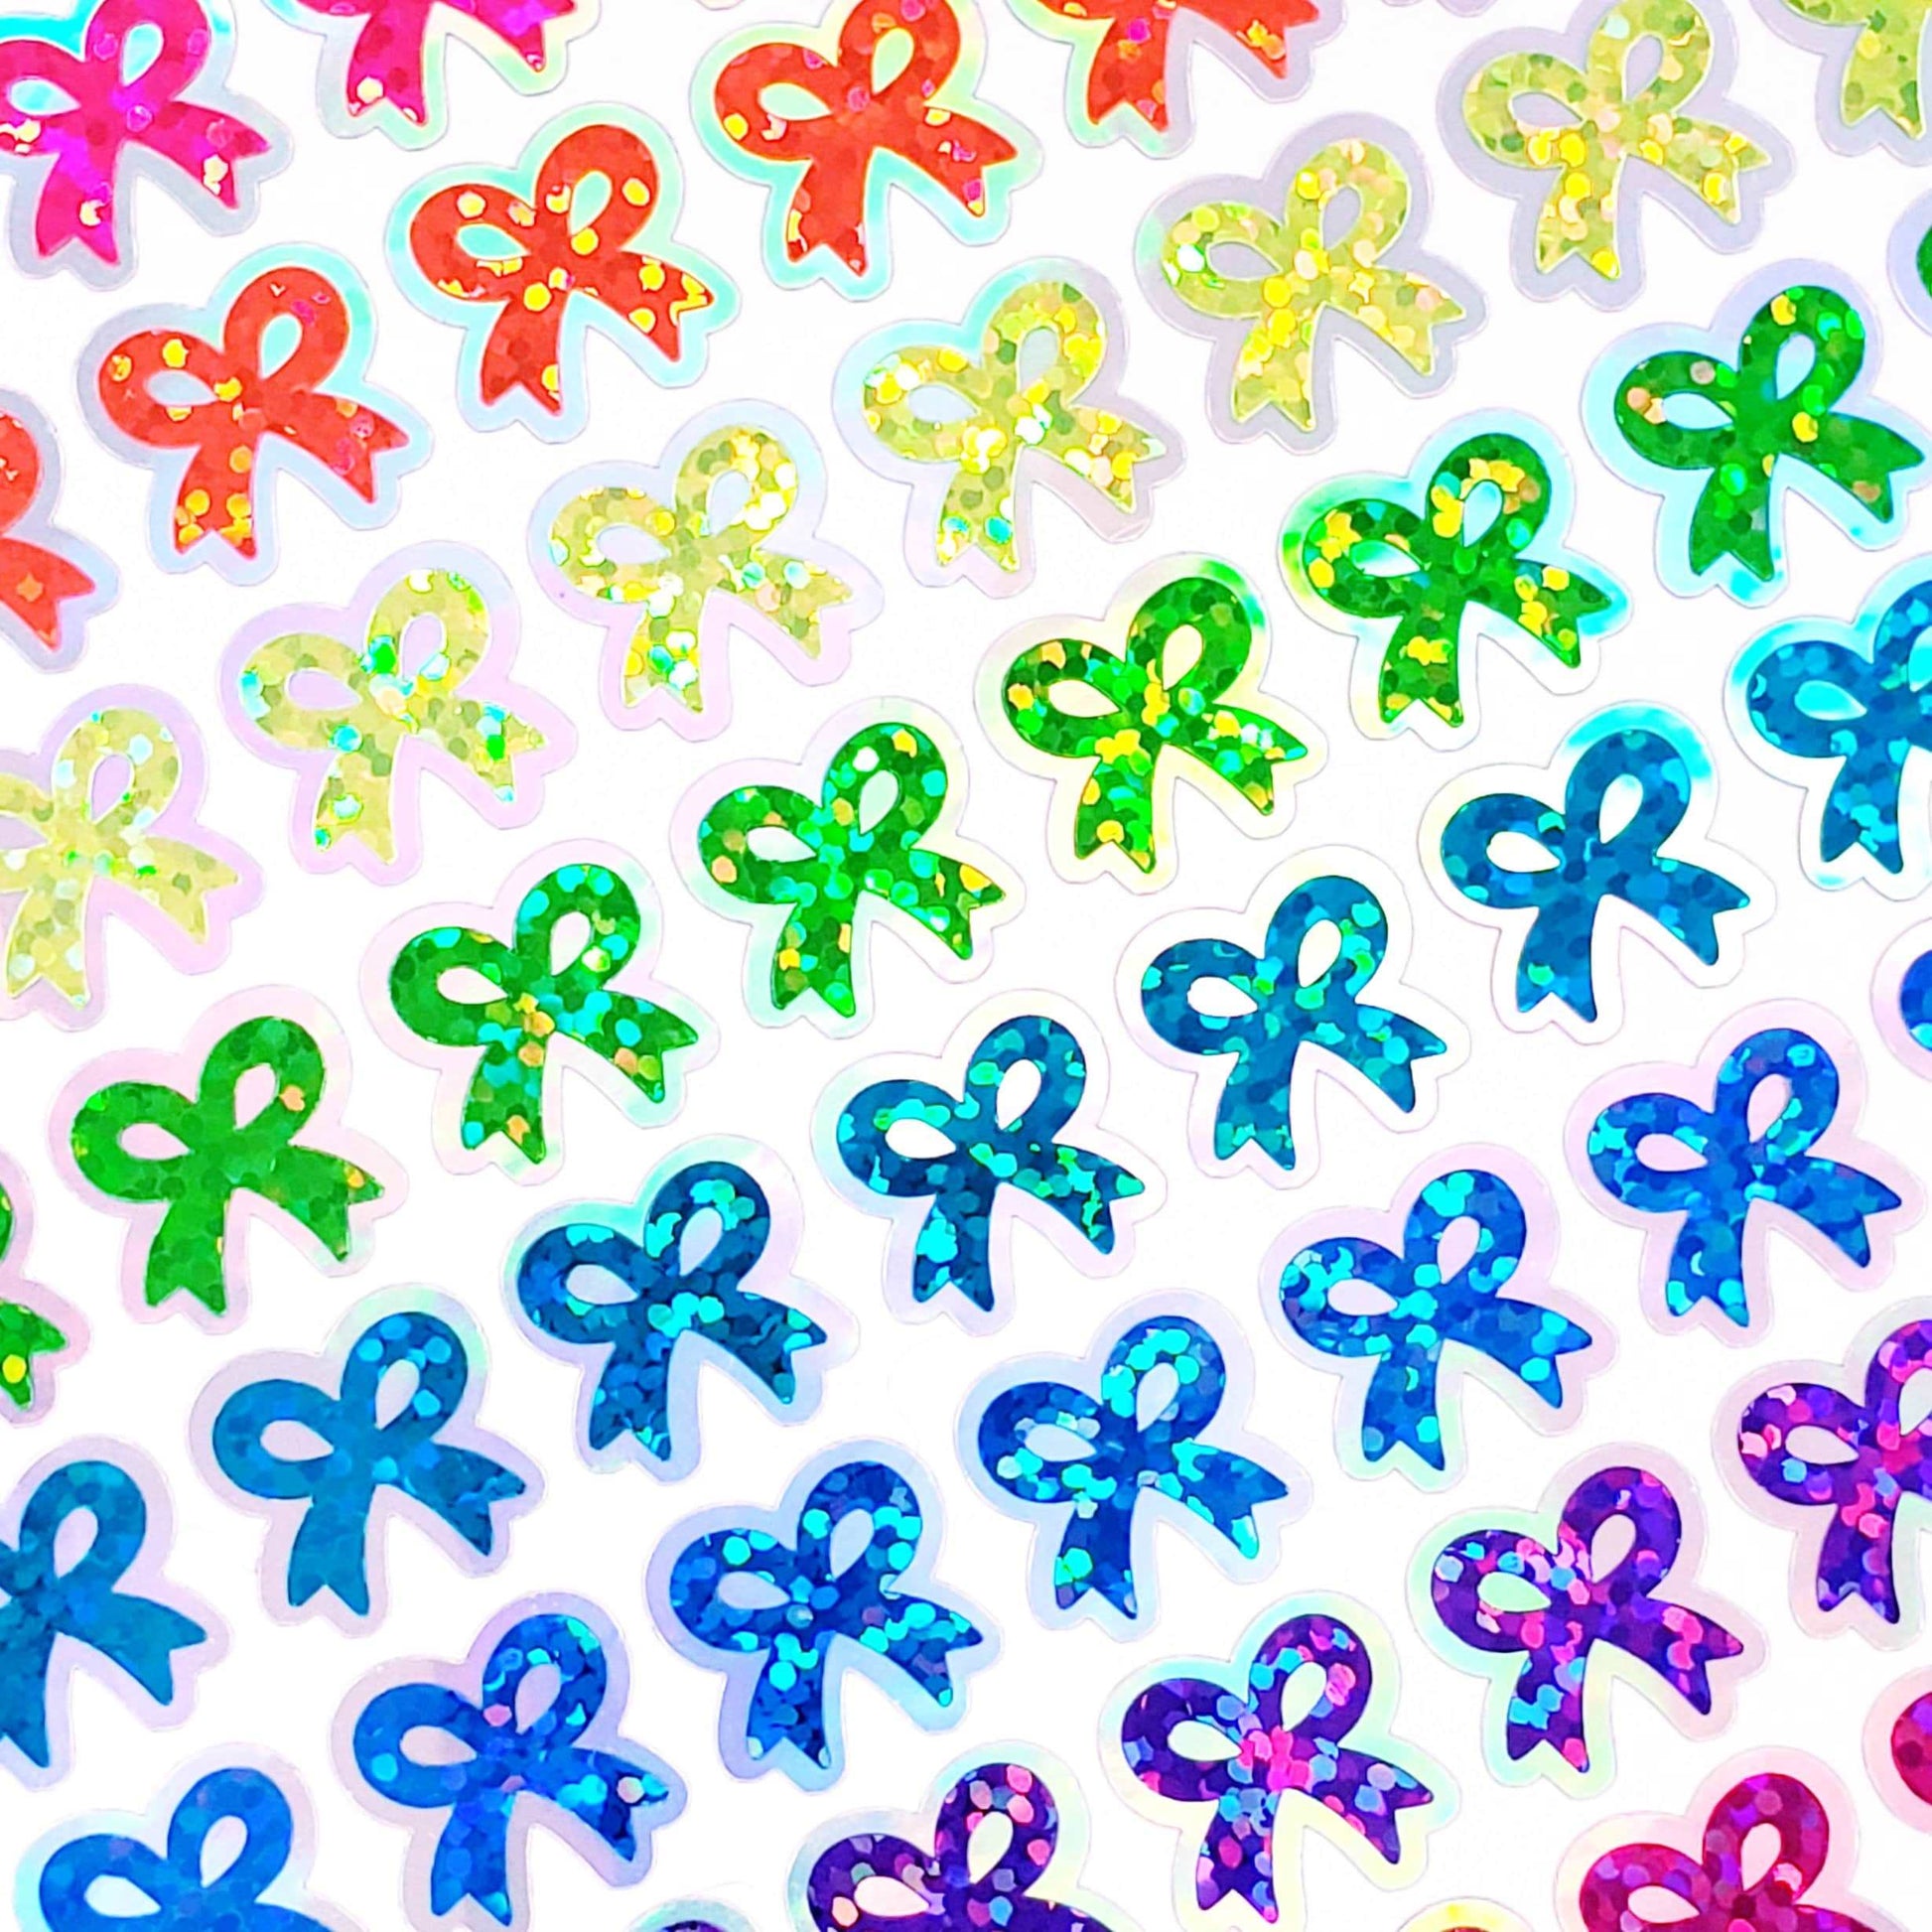 Bow Stickers, set of 88 small ribbon stickers in neon rainbow colors, peel and stick decals for planners, journals, gift tags and cards.